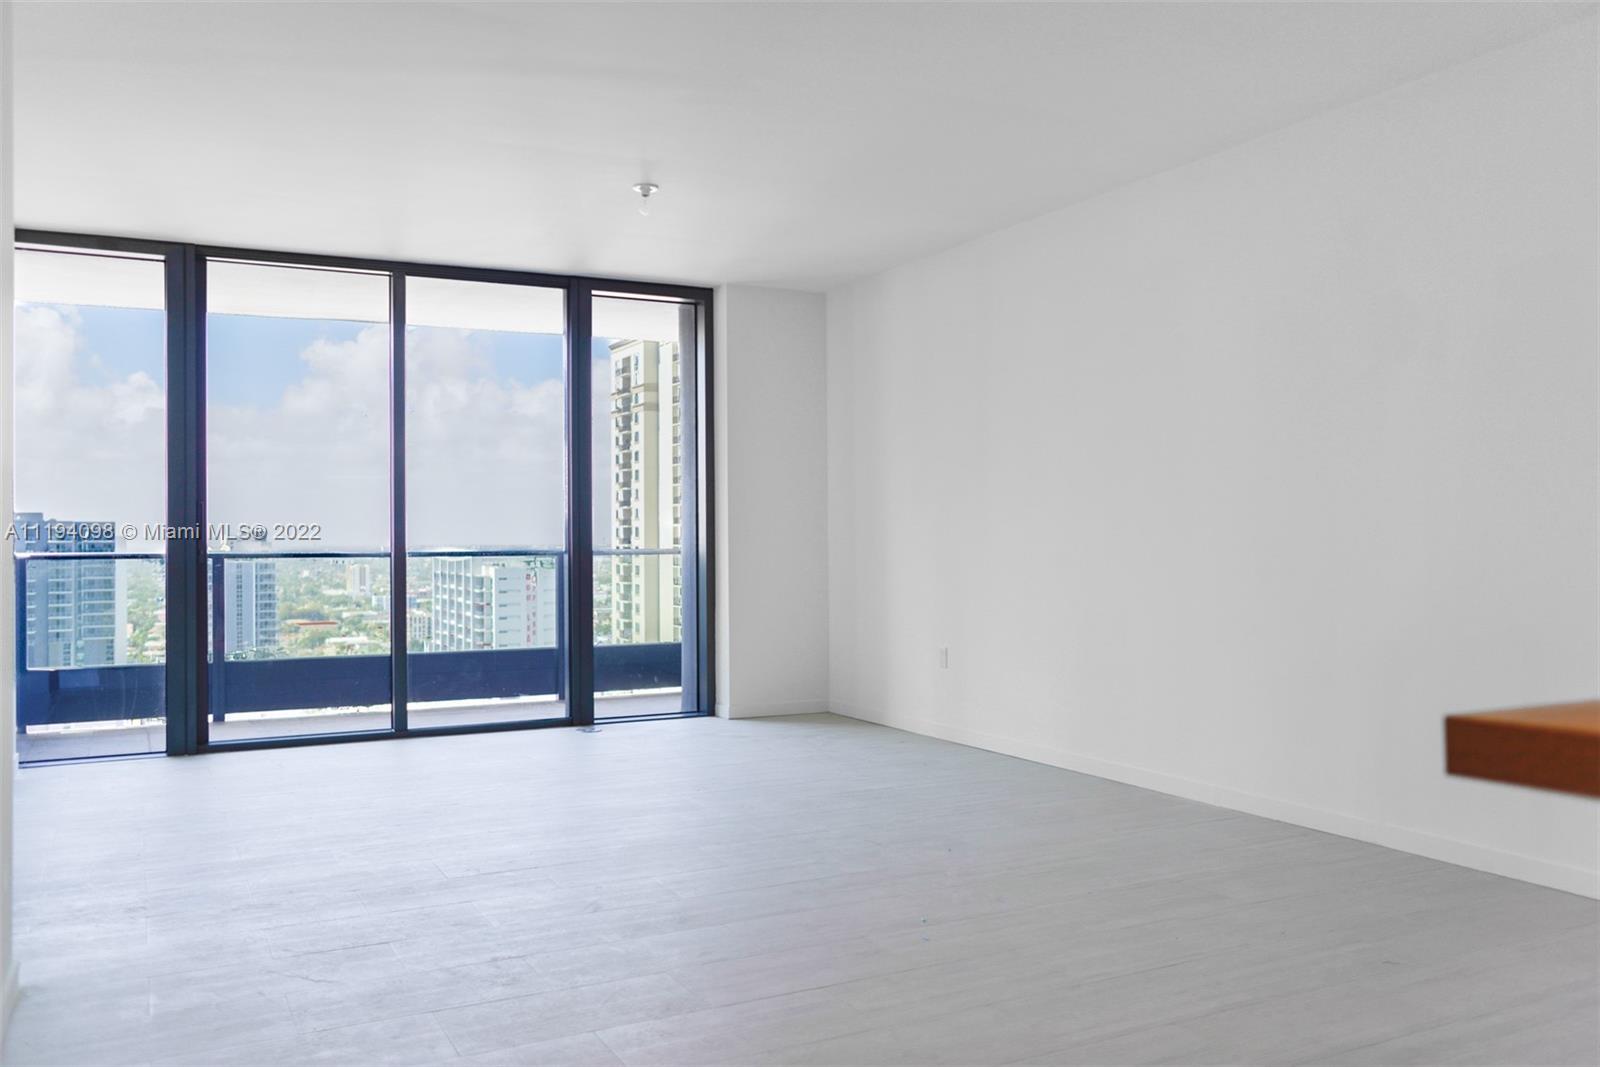 a view of an empty room with a large window